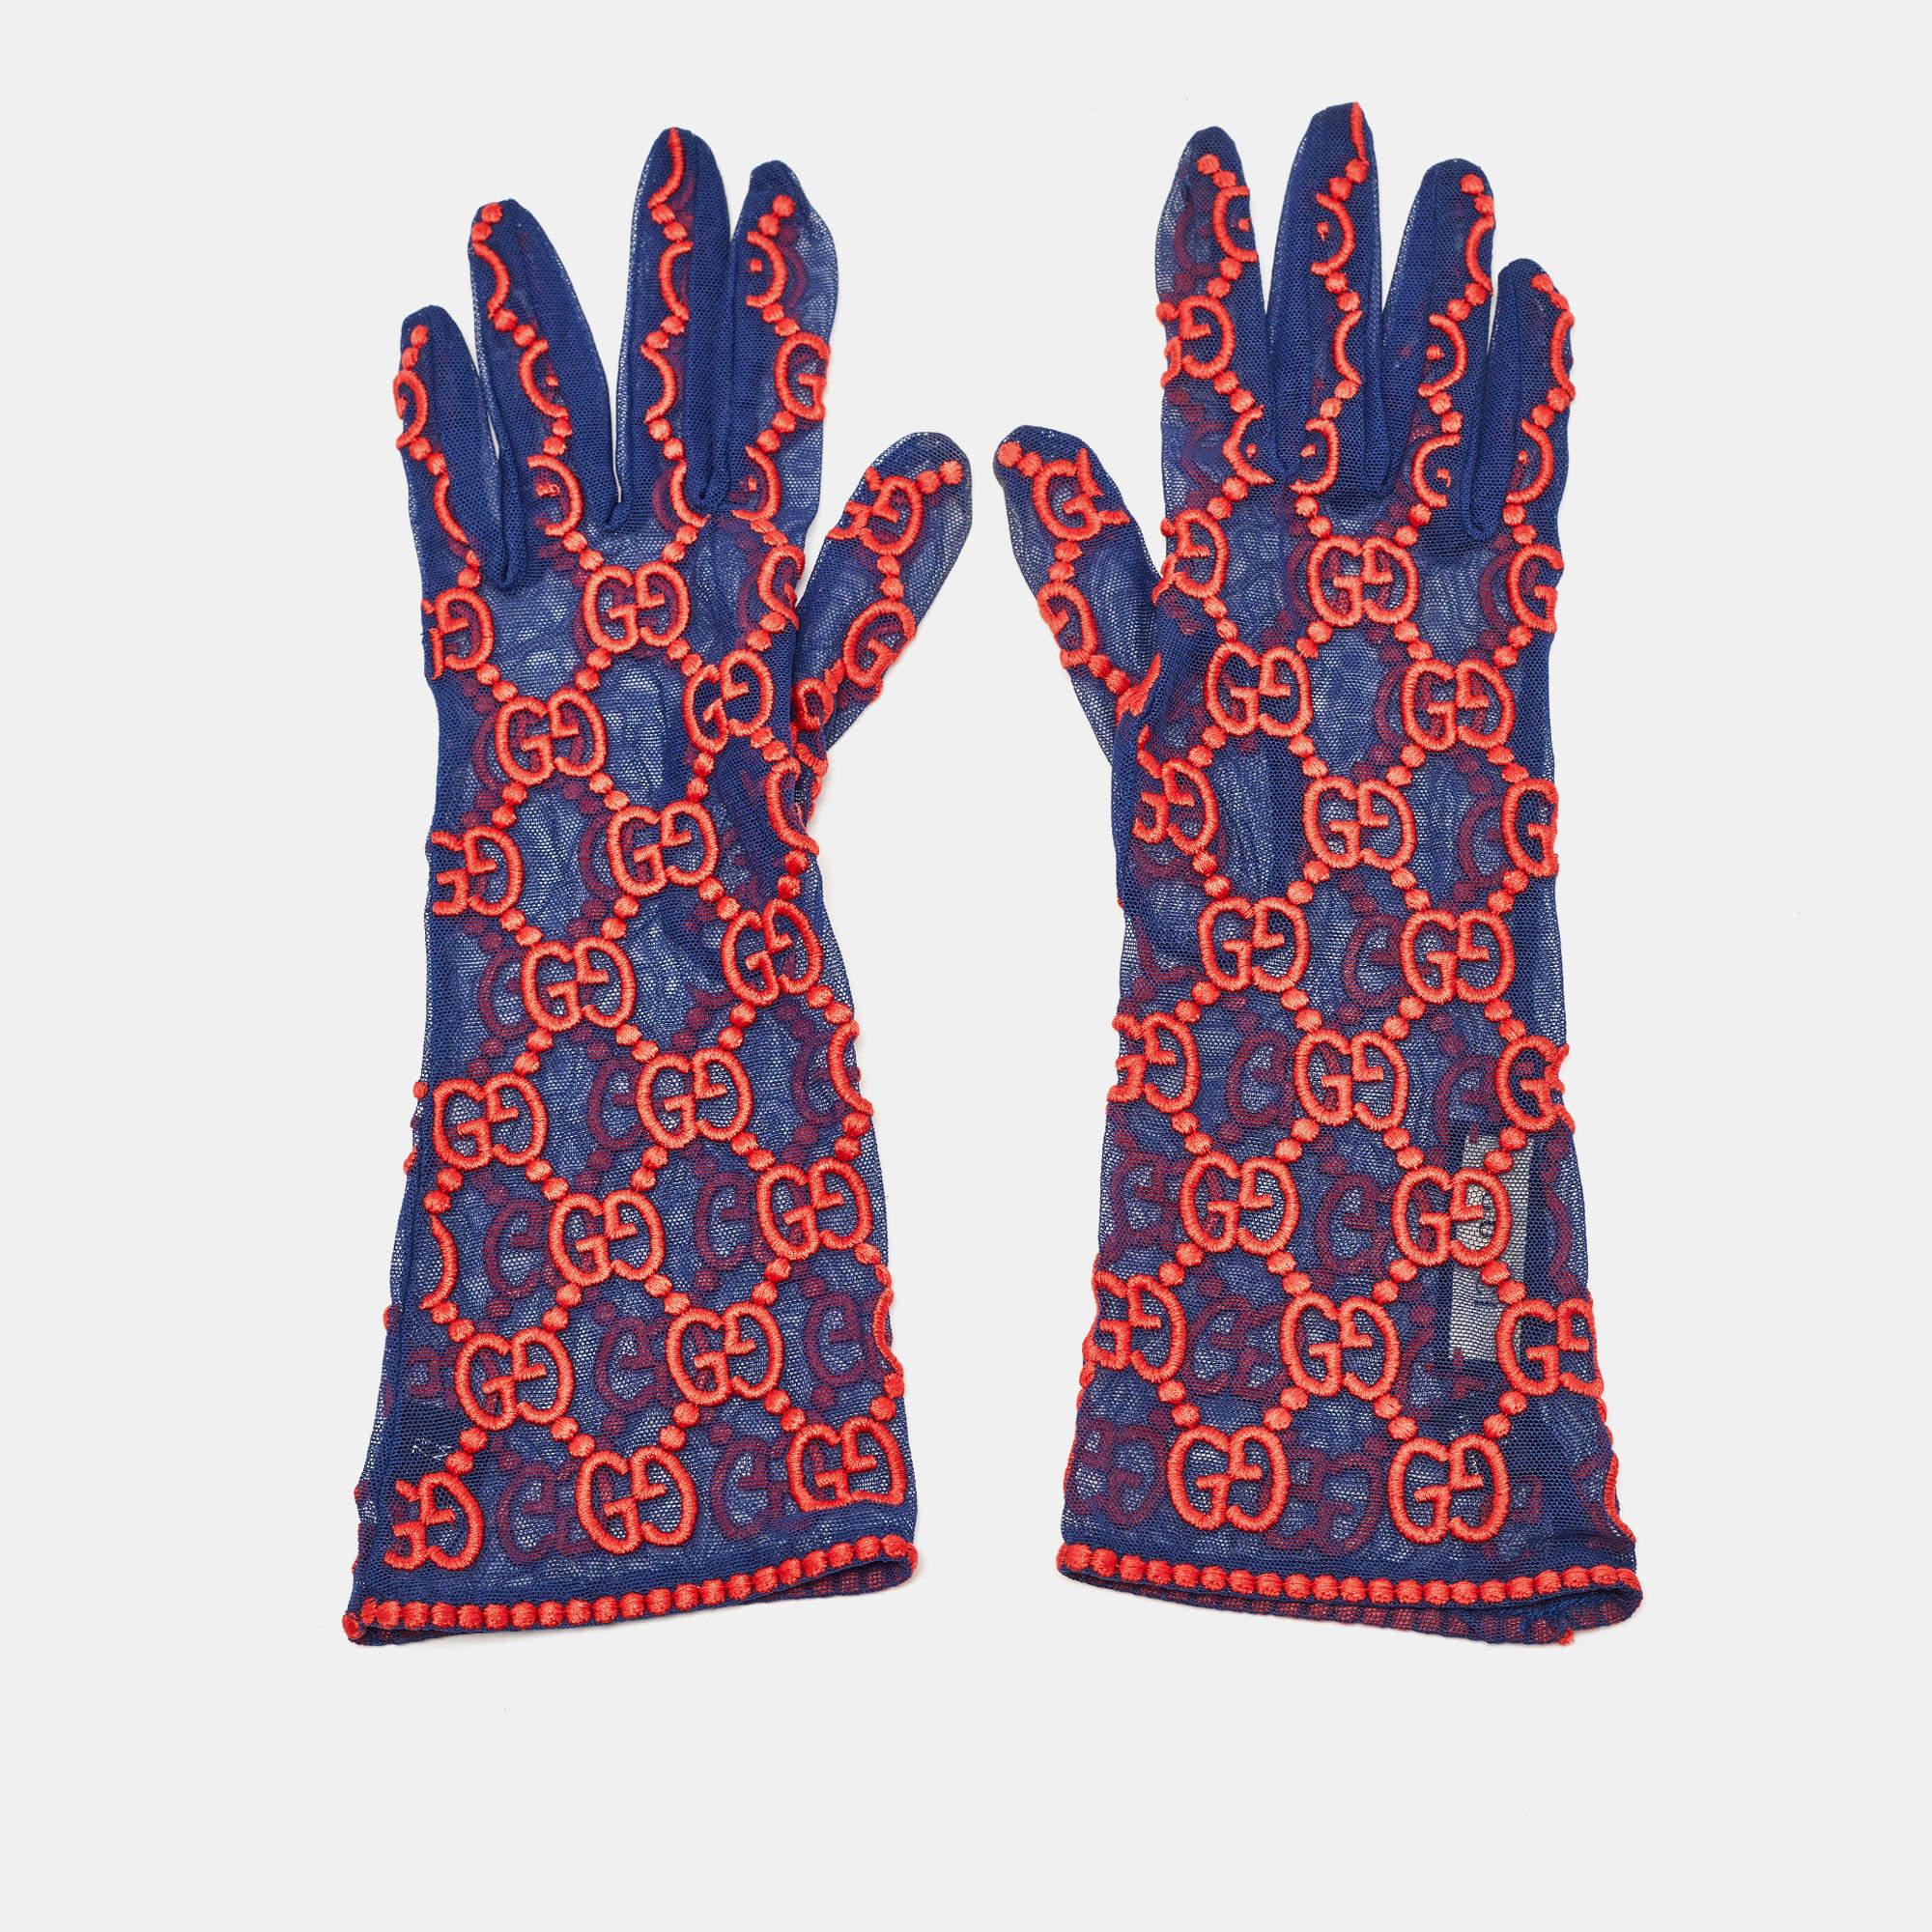 Crafted with meticulous detail, the Gucci gloves exude luxury. Delicate tulle adorned with the iconic GG motif in vibrant blue and red hues creates a striking visual. These gloves effortlessly blend timeless elegance with contemporary flair, making